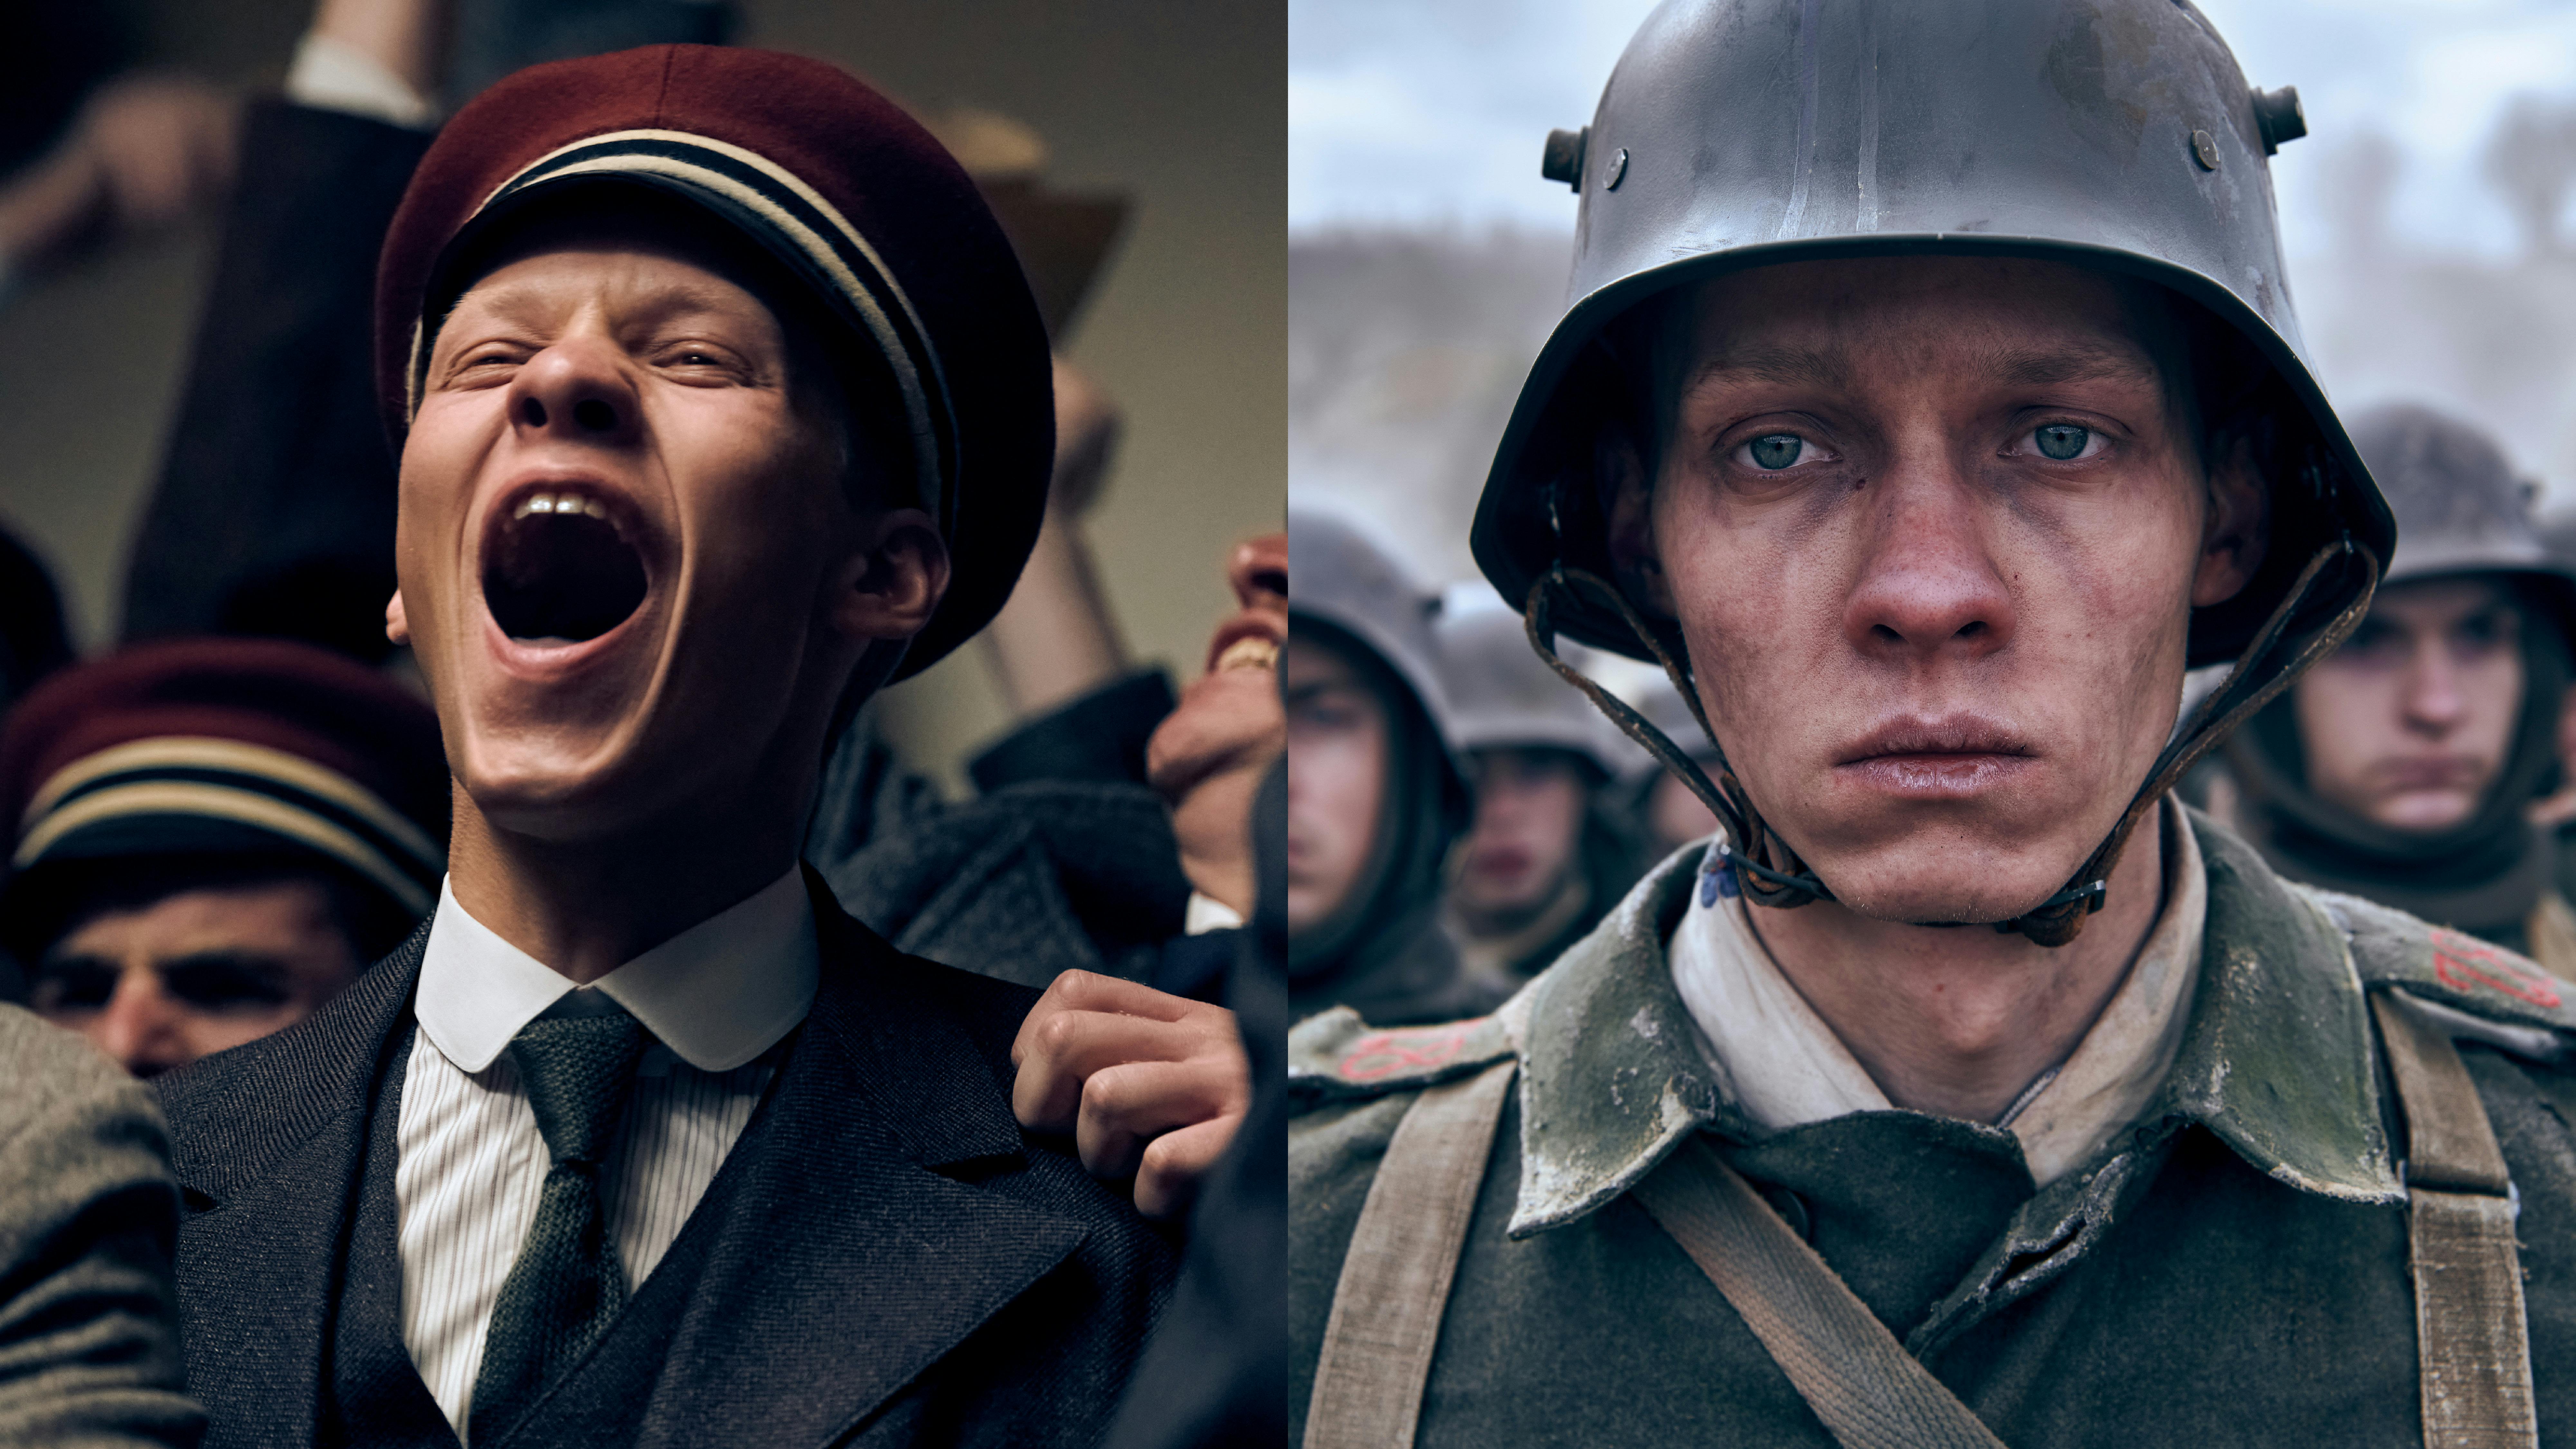 Paul Bäumer (Felix Kammerer) in a diptych shot. In one he wears a uniform and red felt hat and looks joyous. In other he looks dejected and wears a uniform.